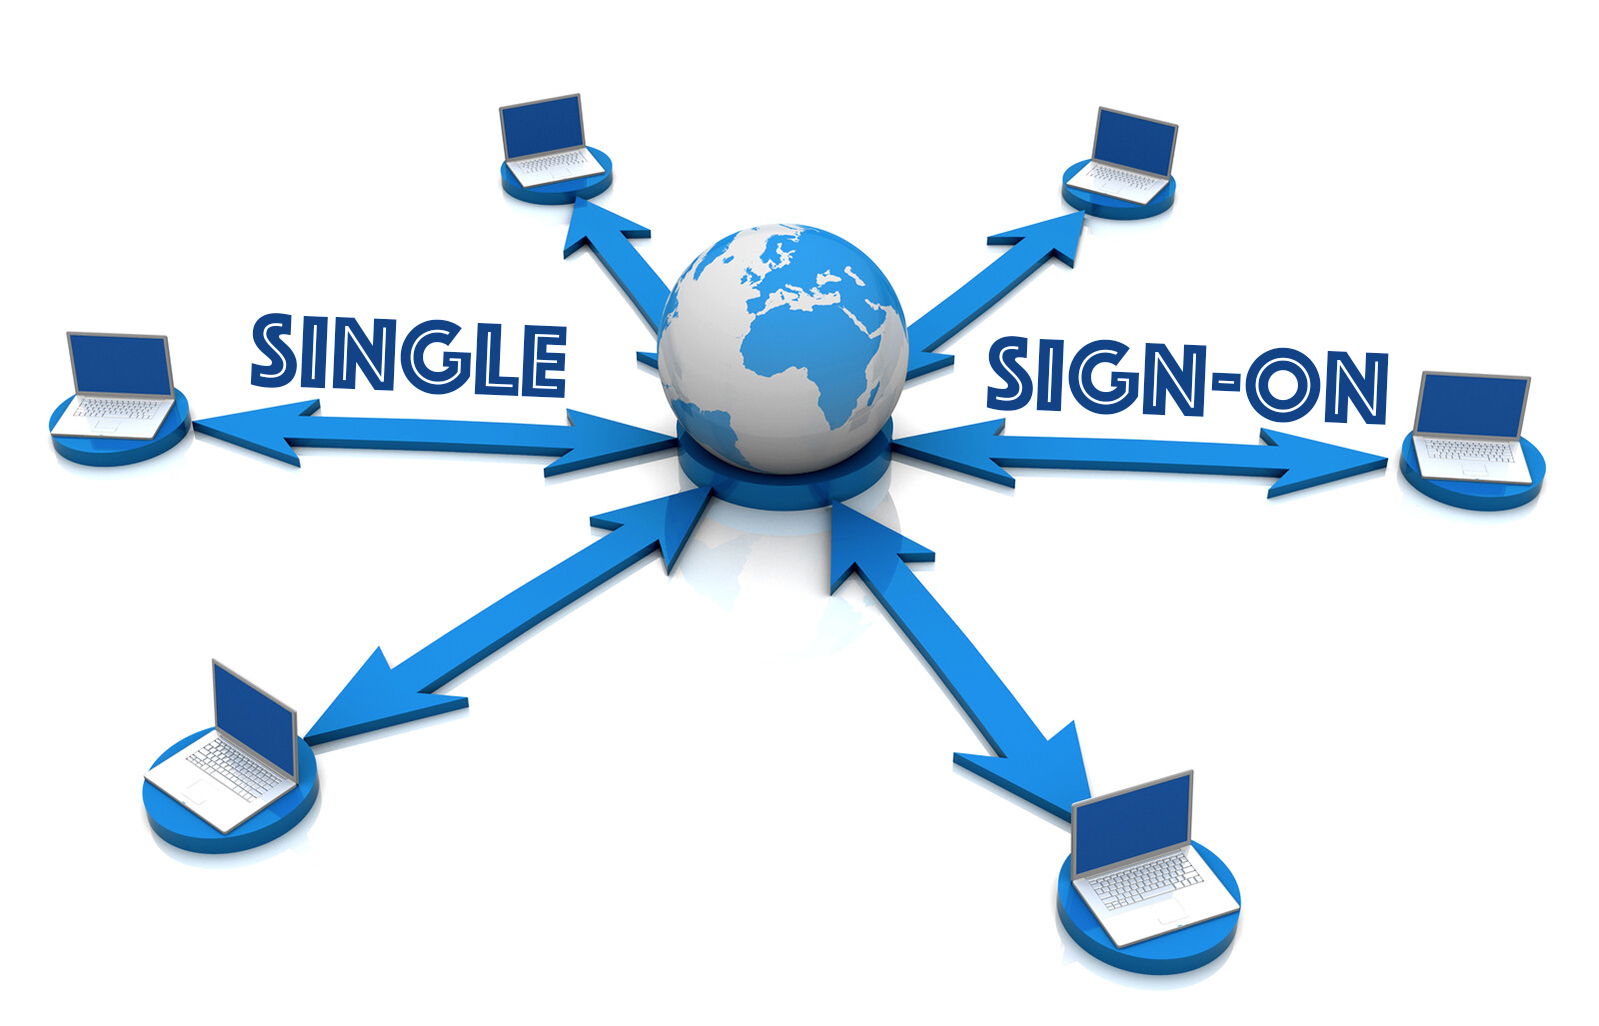 Foresight 2020: Single Sign-on blog by 24By7Security